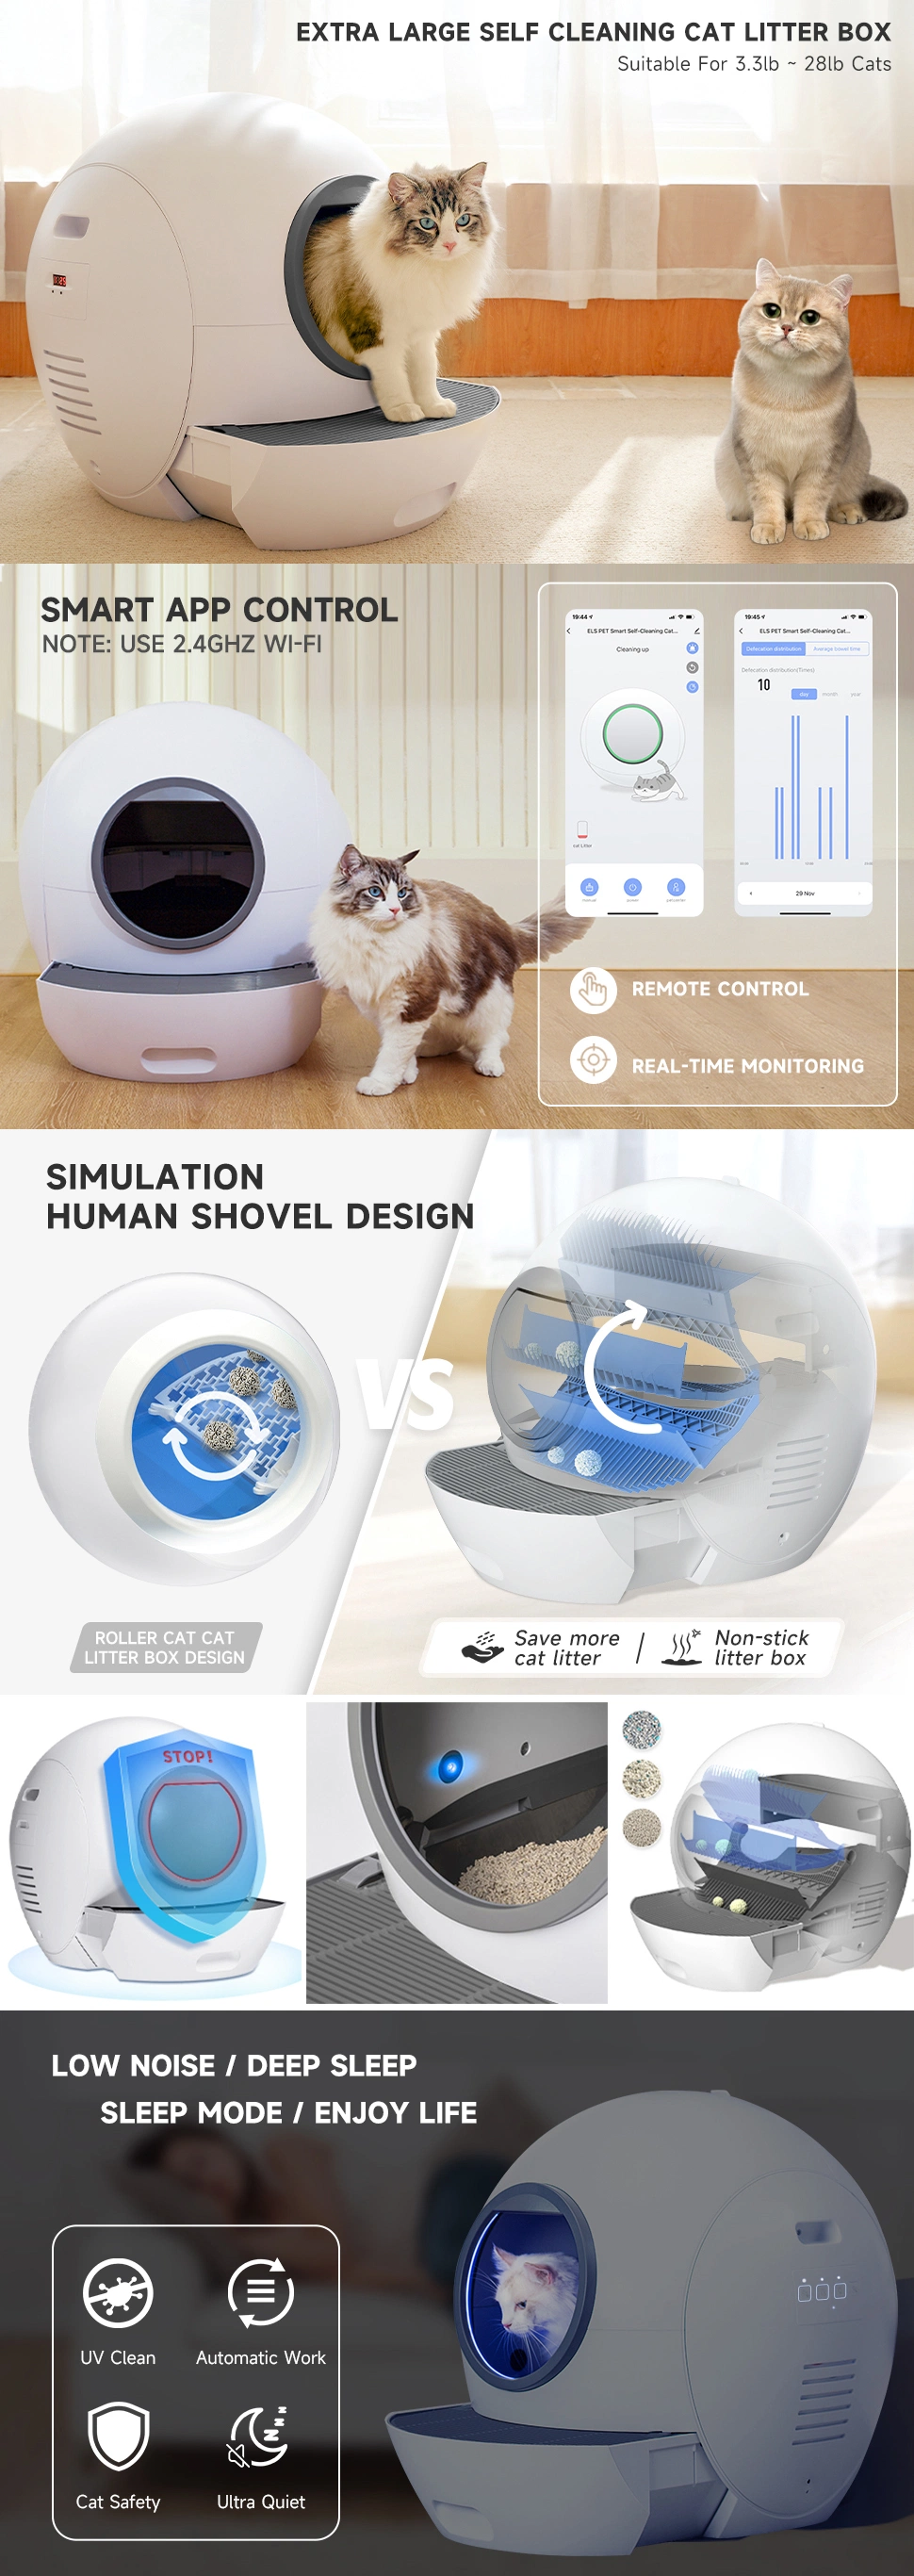 Automatic Cleaning Health Disinfecting Cat Toilet Litter Tray Box Intelligent Sterilizing Smart WiFi Control Phone APP Remote Auto Shovel Setting Cat Litter Box